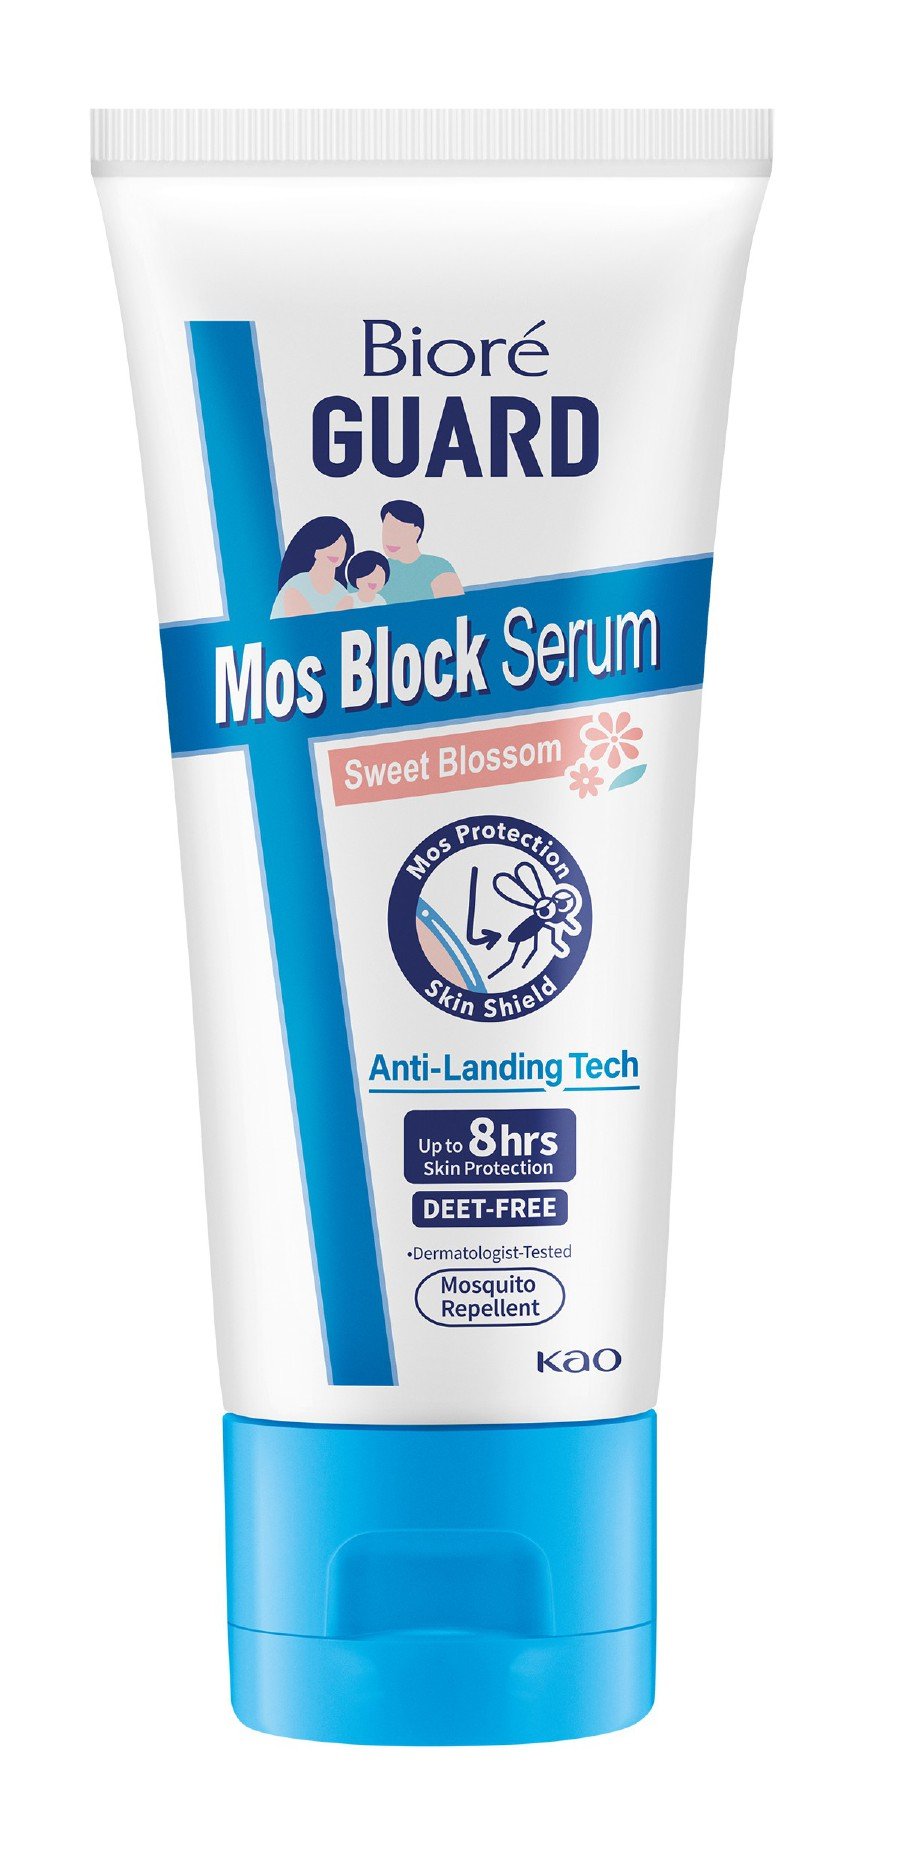 Bioré Guard Mos Block Serum is based on a repellent technology that makes the skin surface repulsive to mosquitoes.